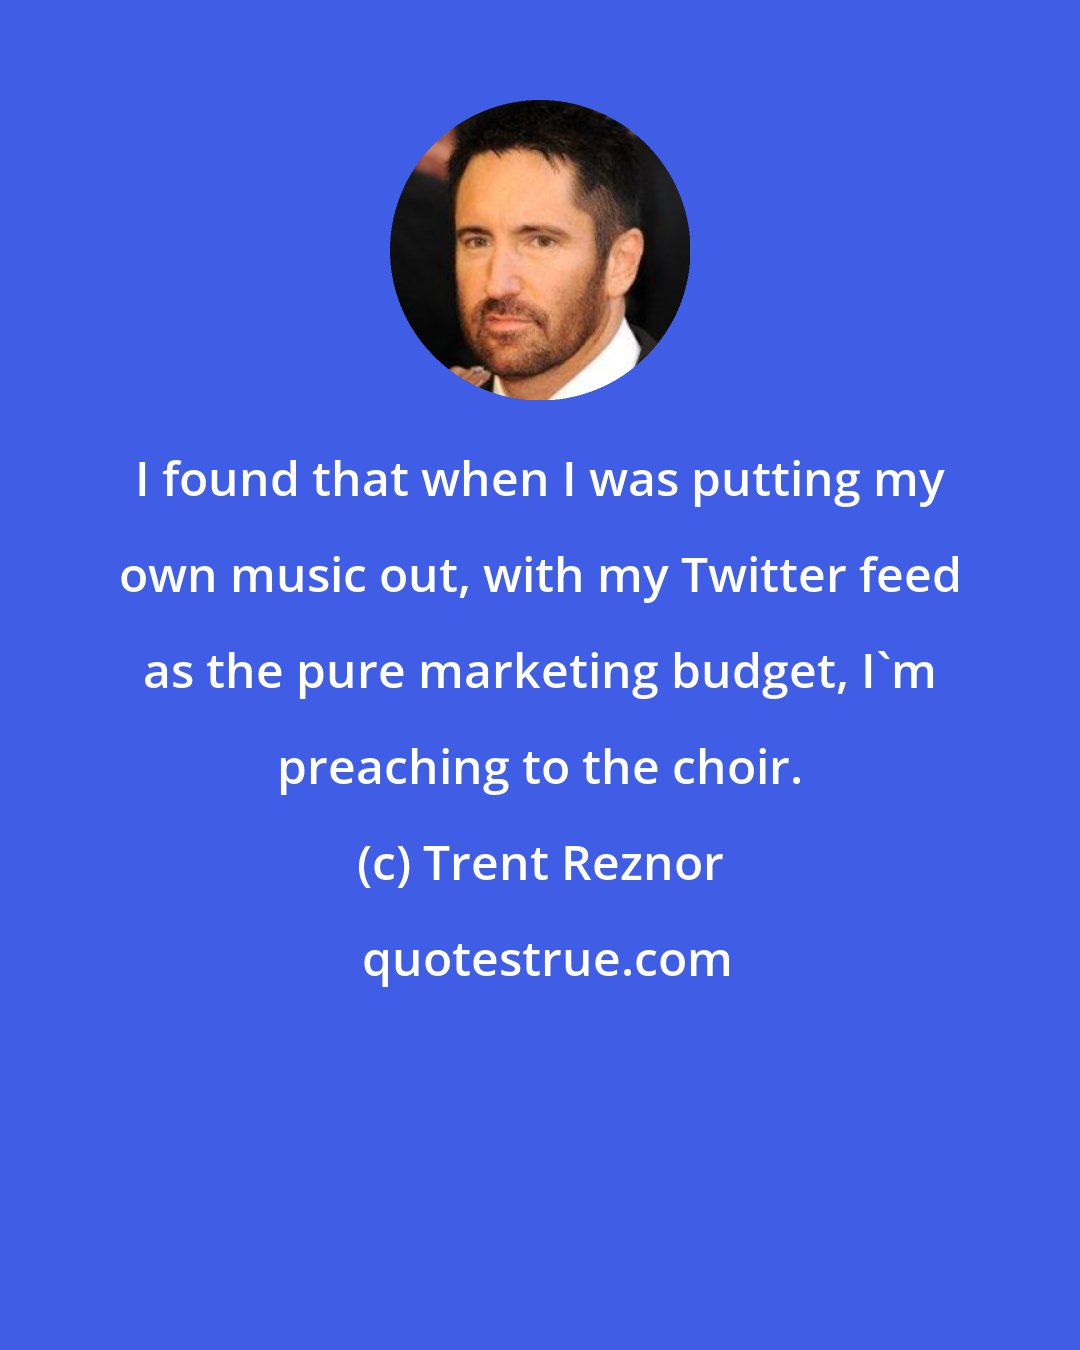 Trent Reznor: I found that when I was putting my own music out, with my Twitter feed as the pure marketing budget, I'm preaching to the choir.